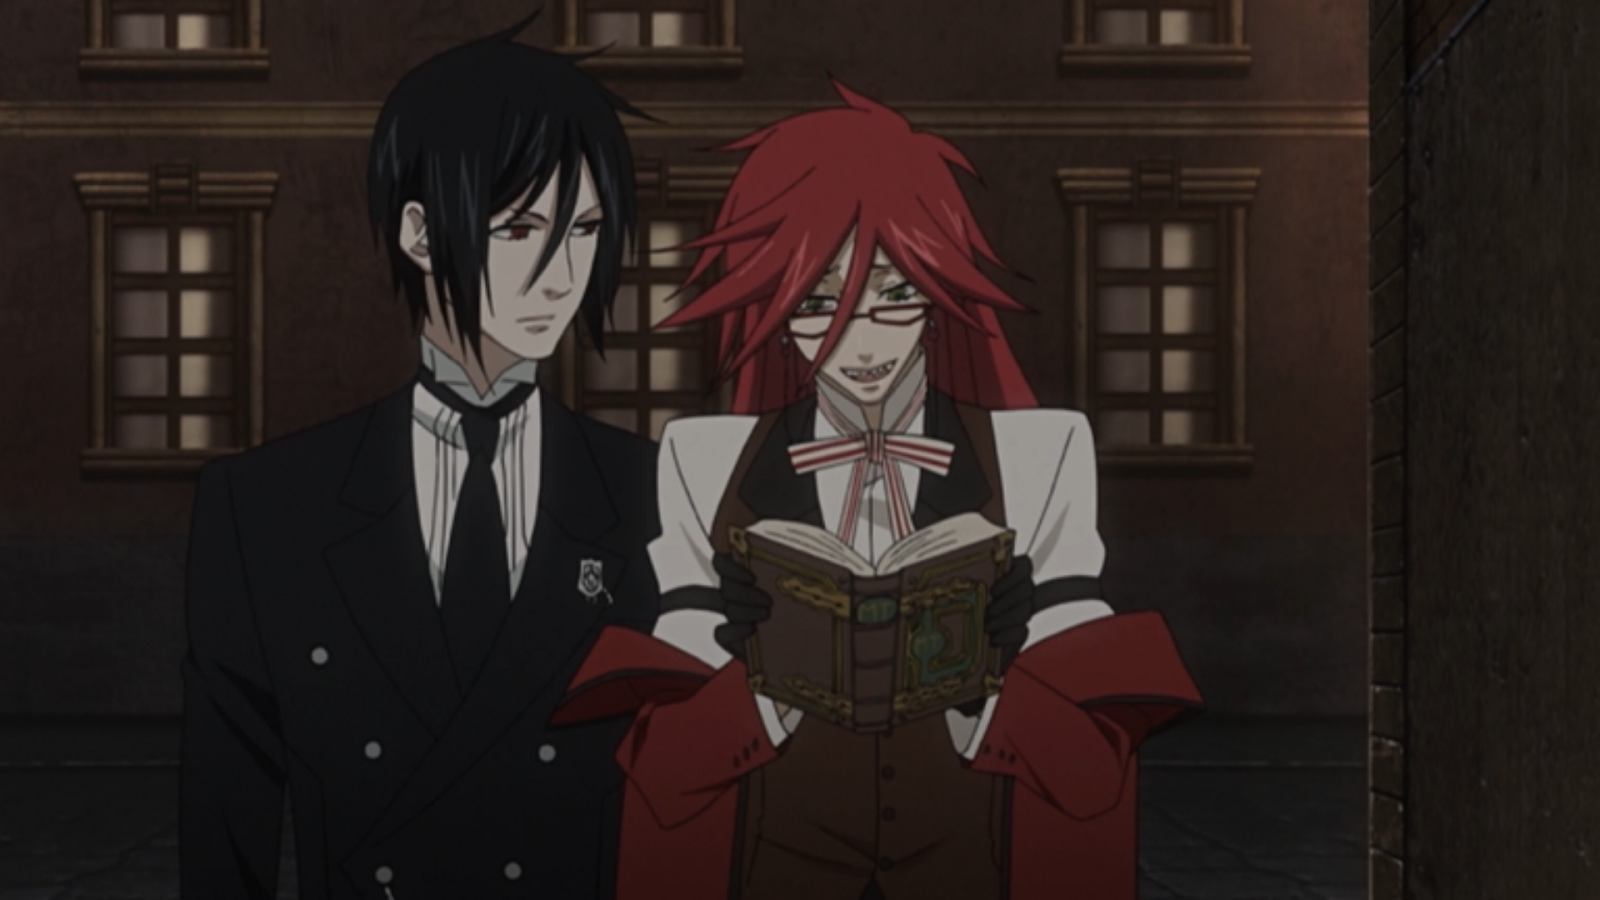 Black Butler: Book of Circus  Anime Review – Pinned Up Ink